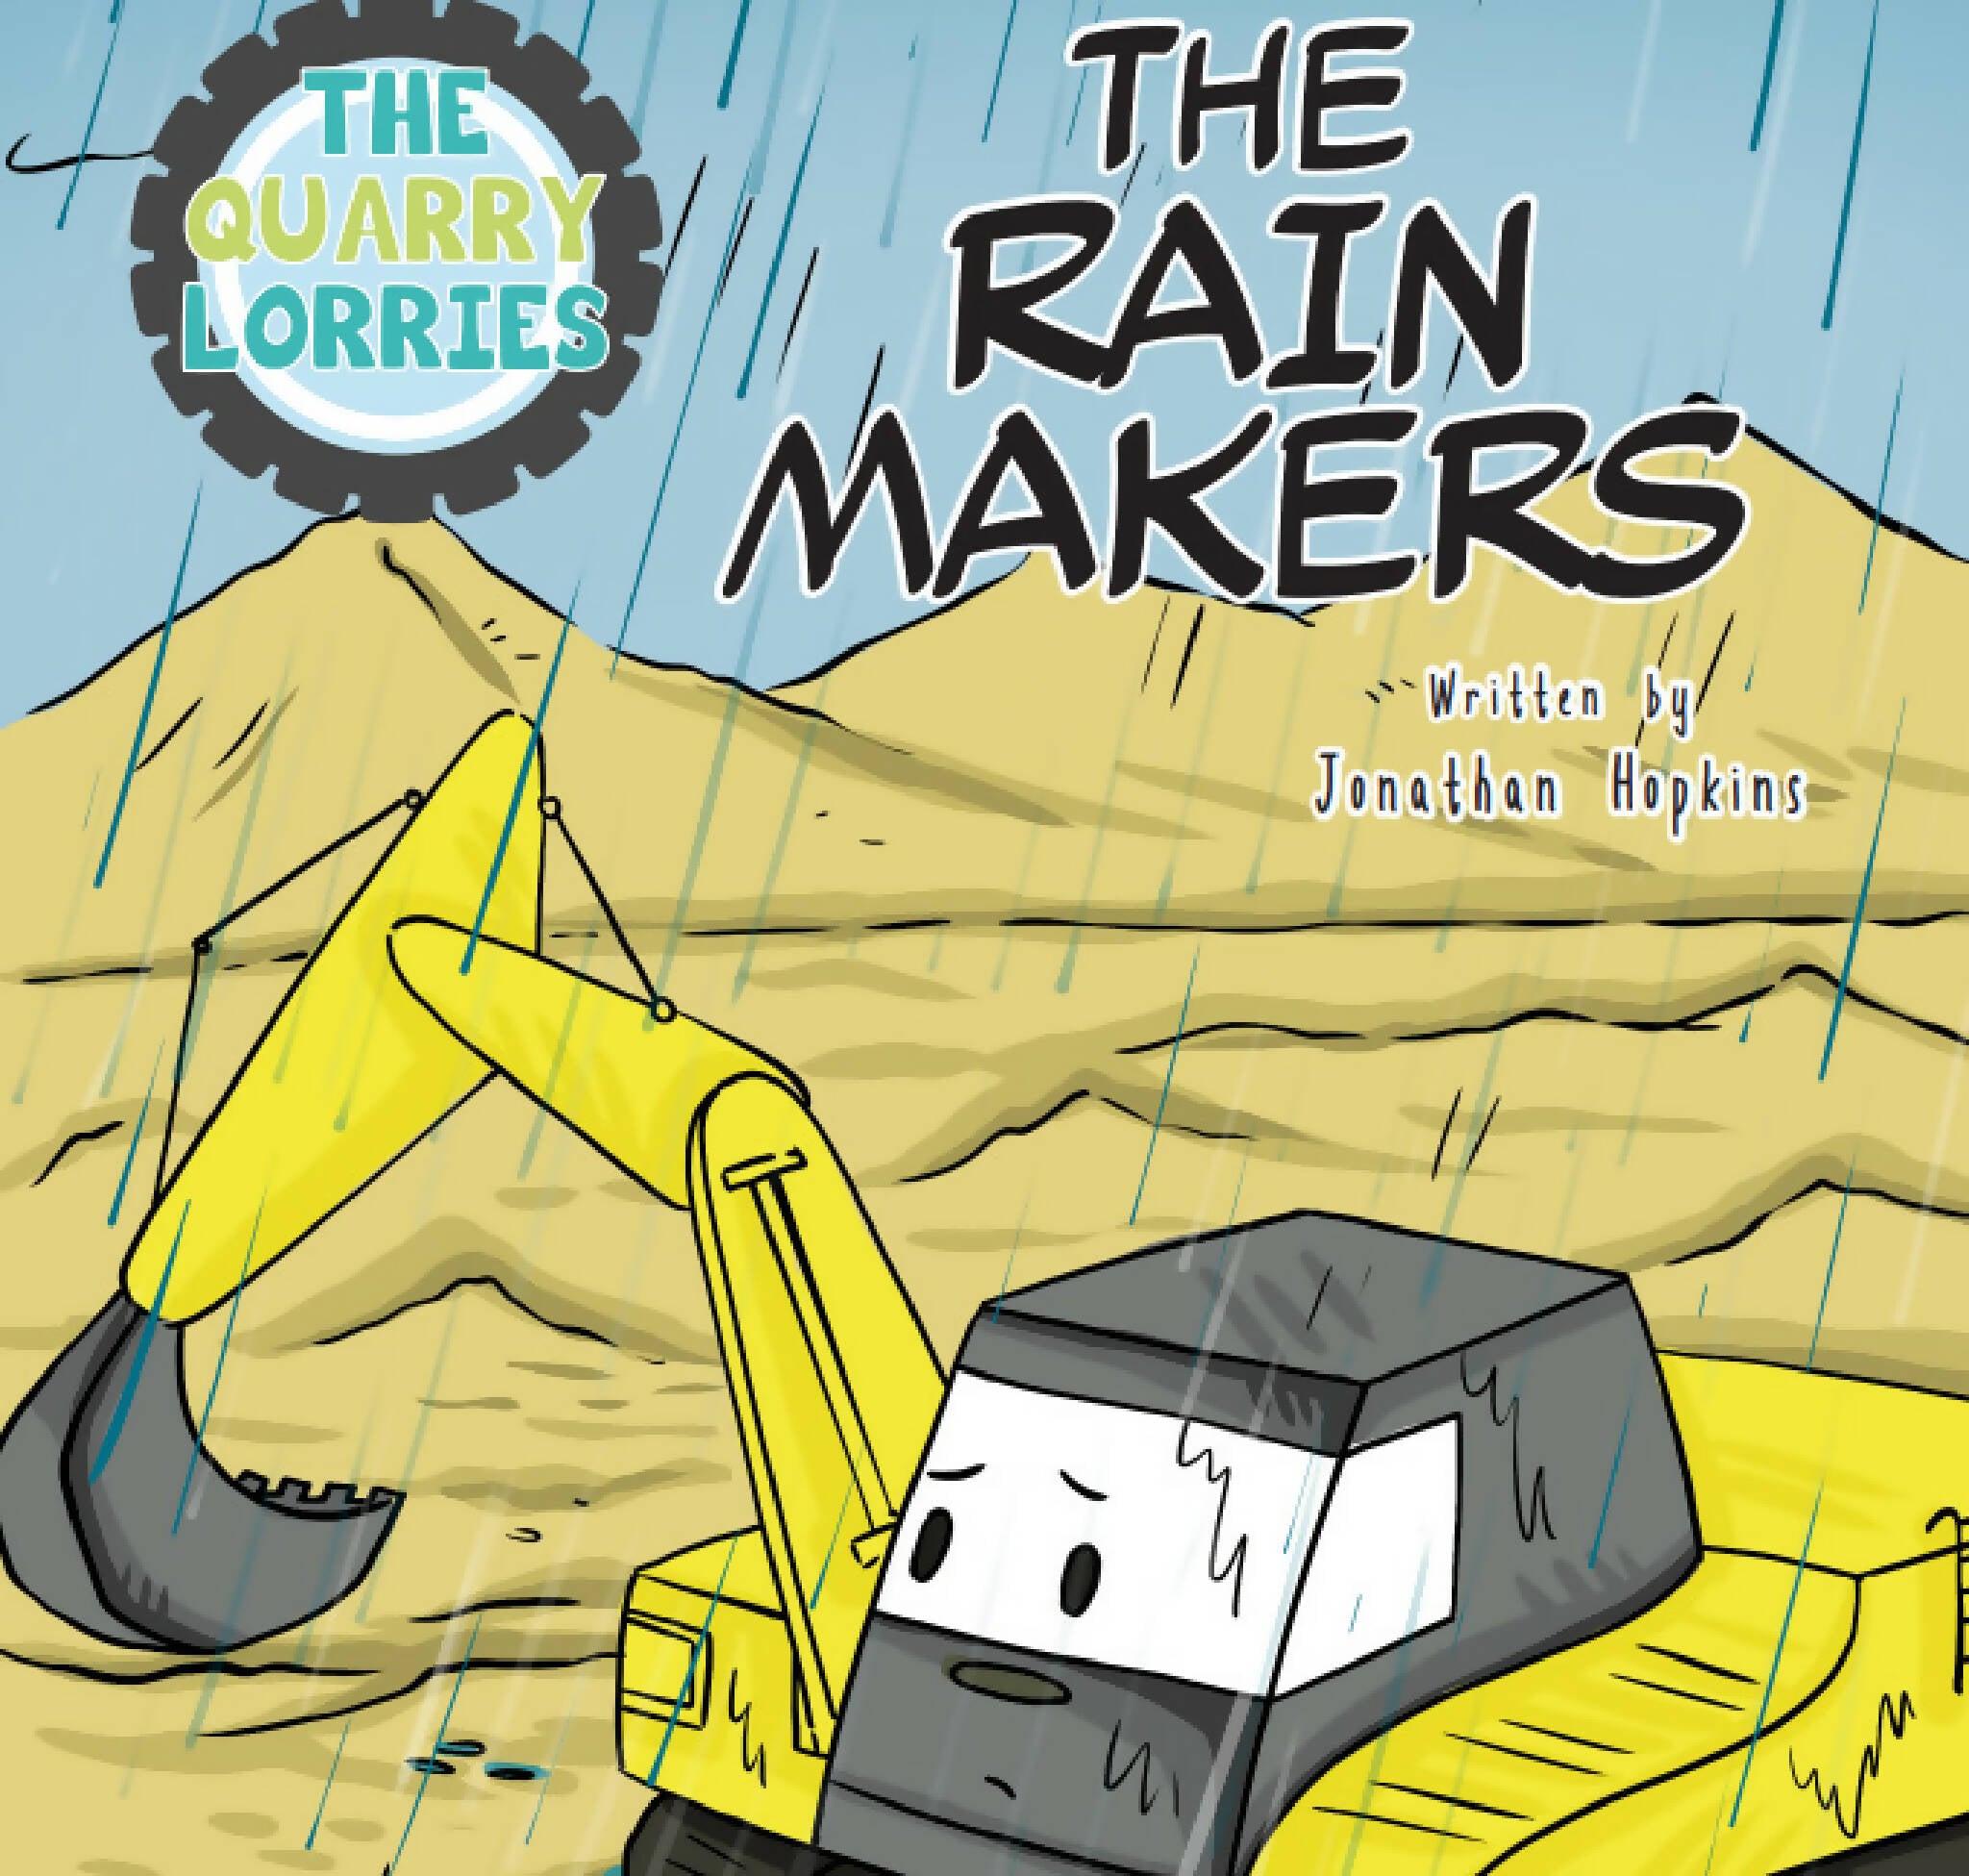 The Quarry Lorries: The Rain Makers